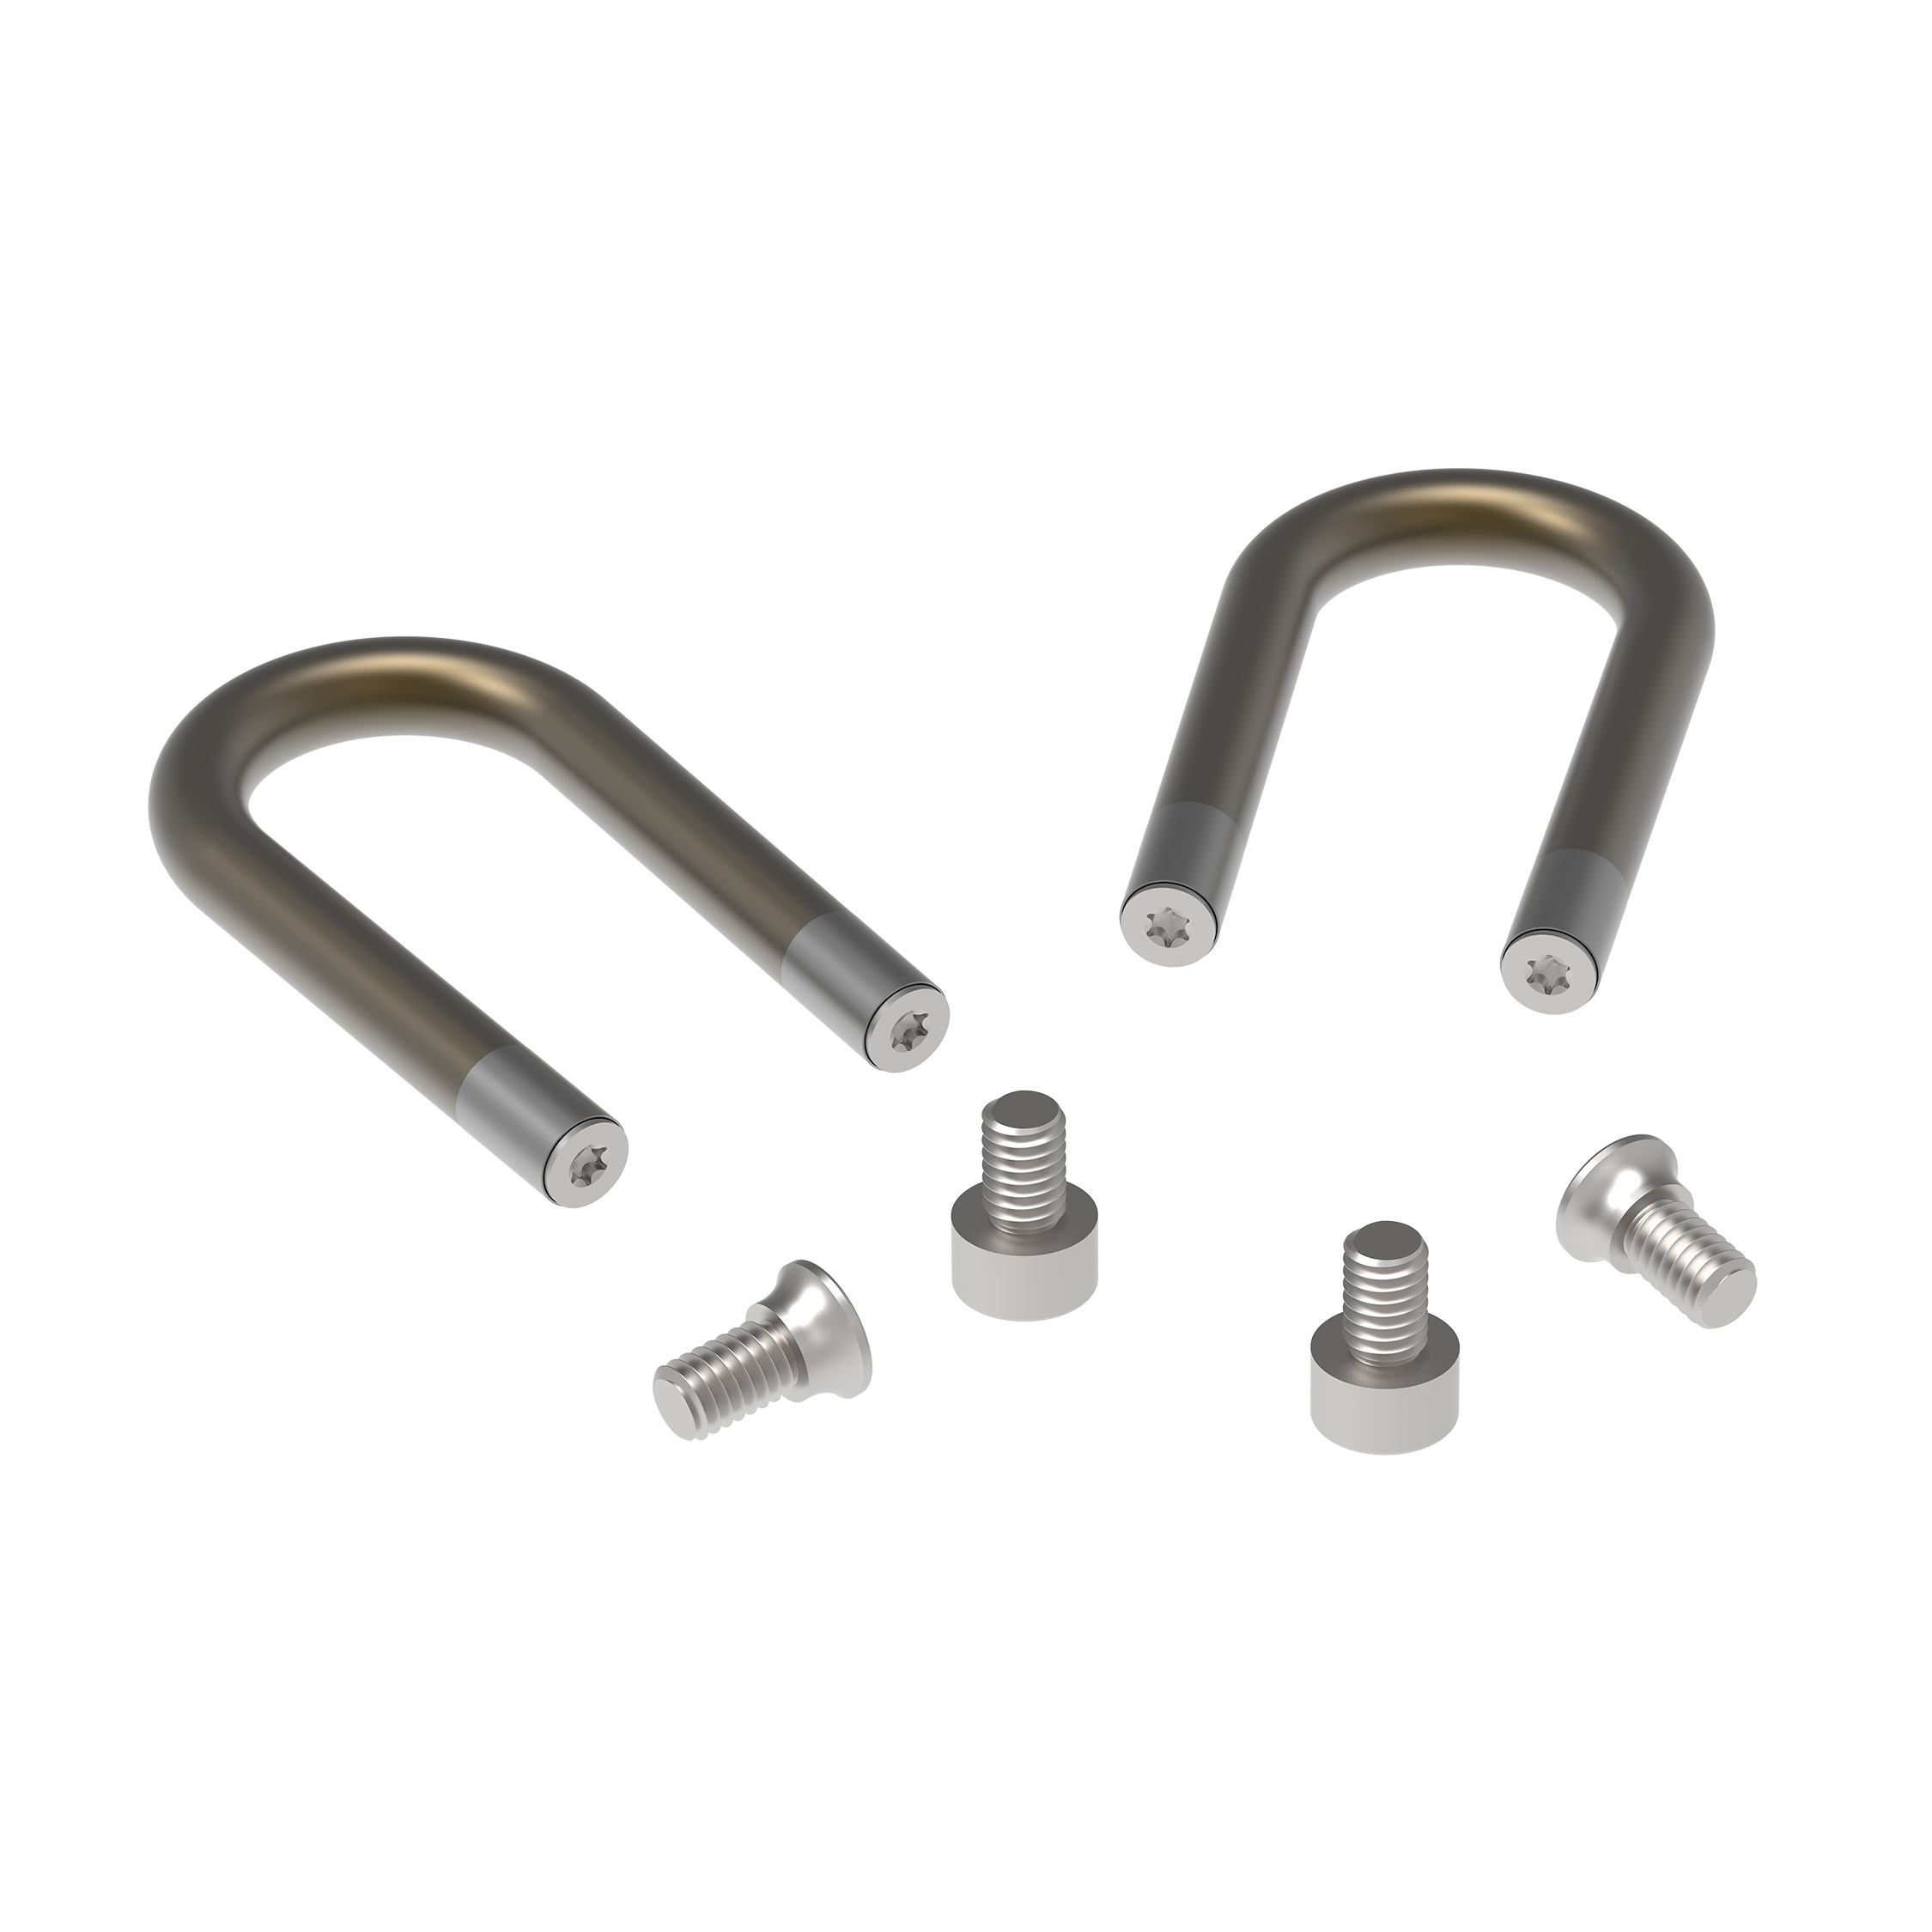 Titanium "U" spring kit with rolling-in system